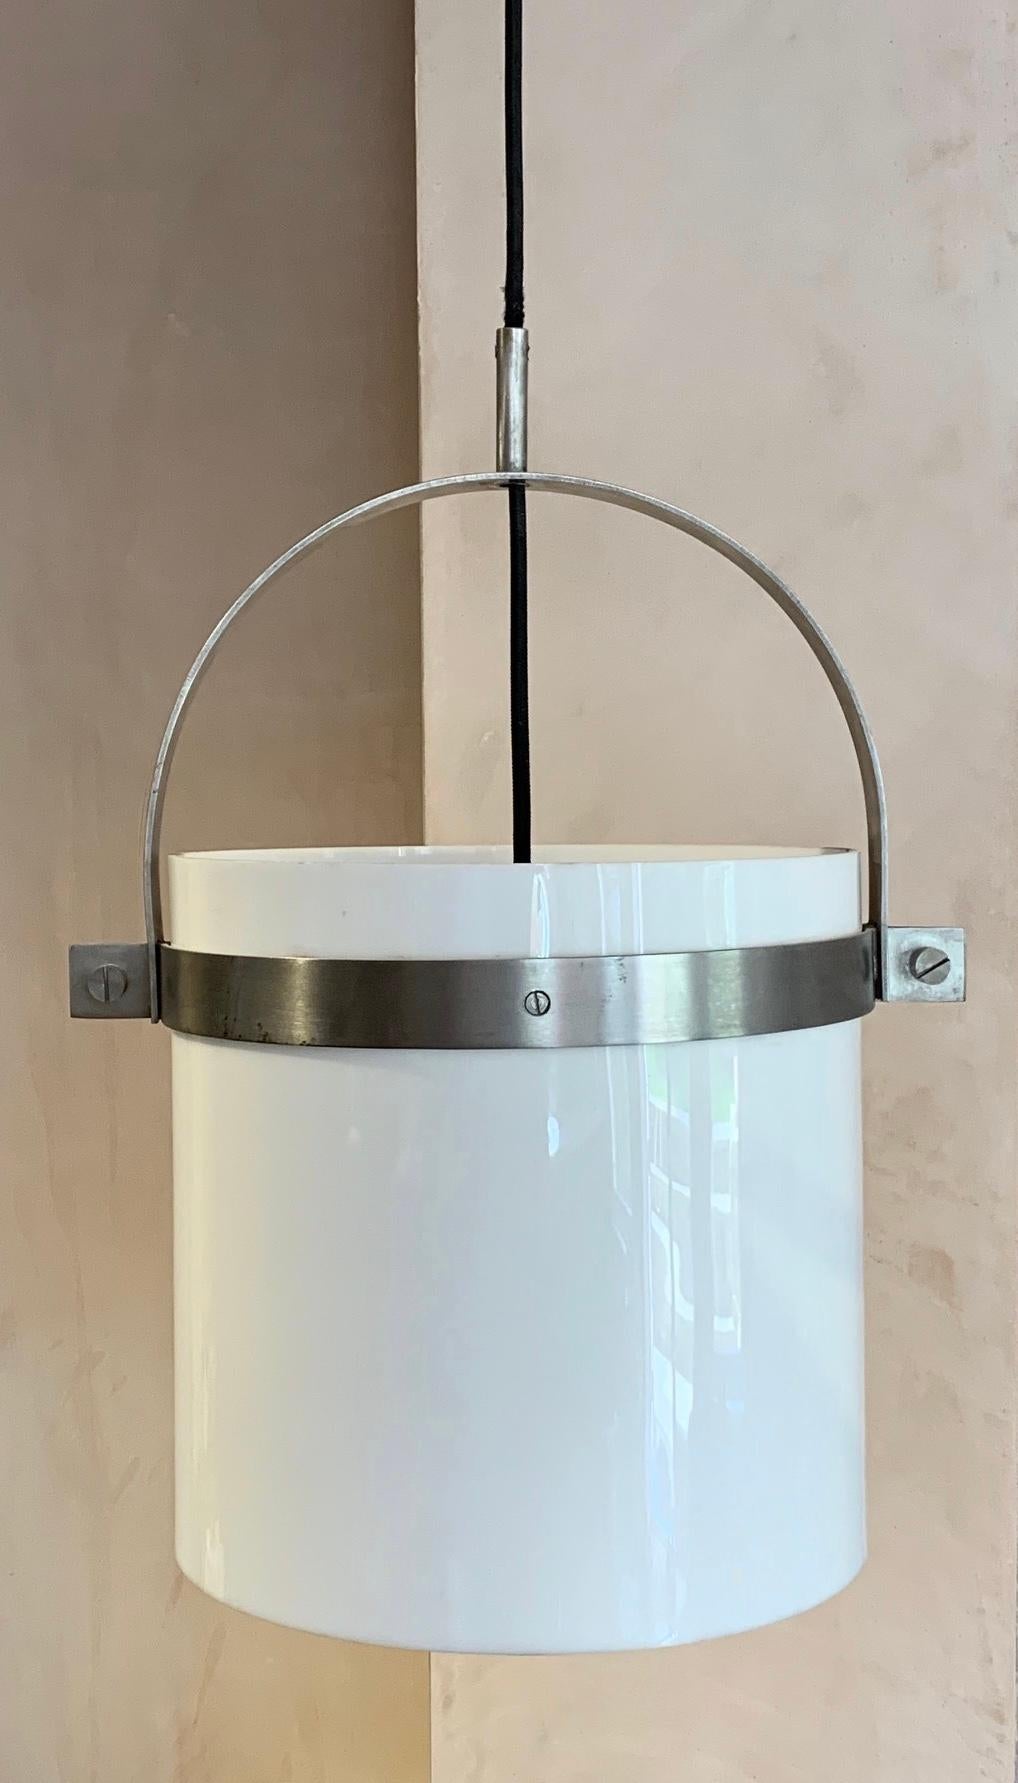 A cool looking brushed steel and perspex ceiling light, pendant by the Spanish Designer Jordi Vilanova Bosch (1925-1998). Good stylish brushed steel detail. Great light for a hall way and above a dining table. Can be used with a dimmer. Timeless